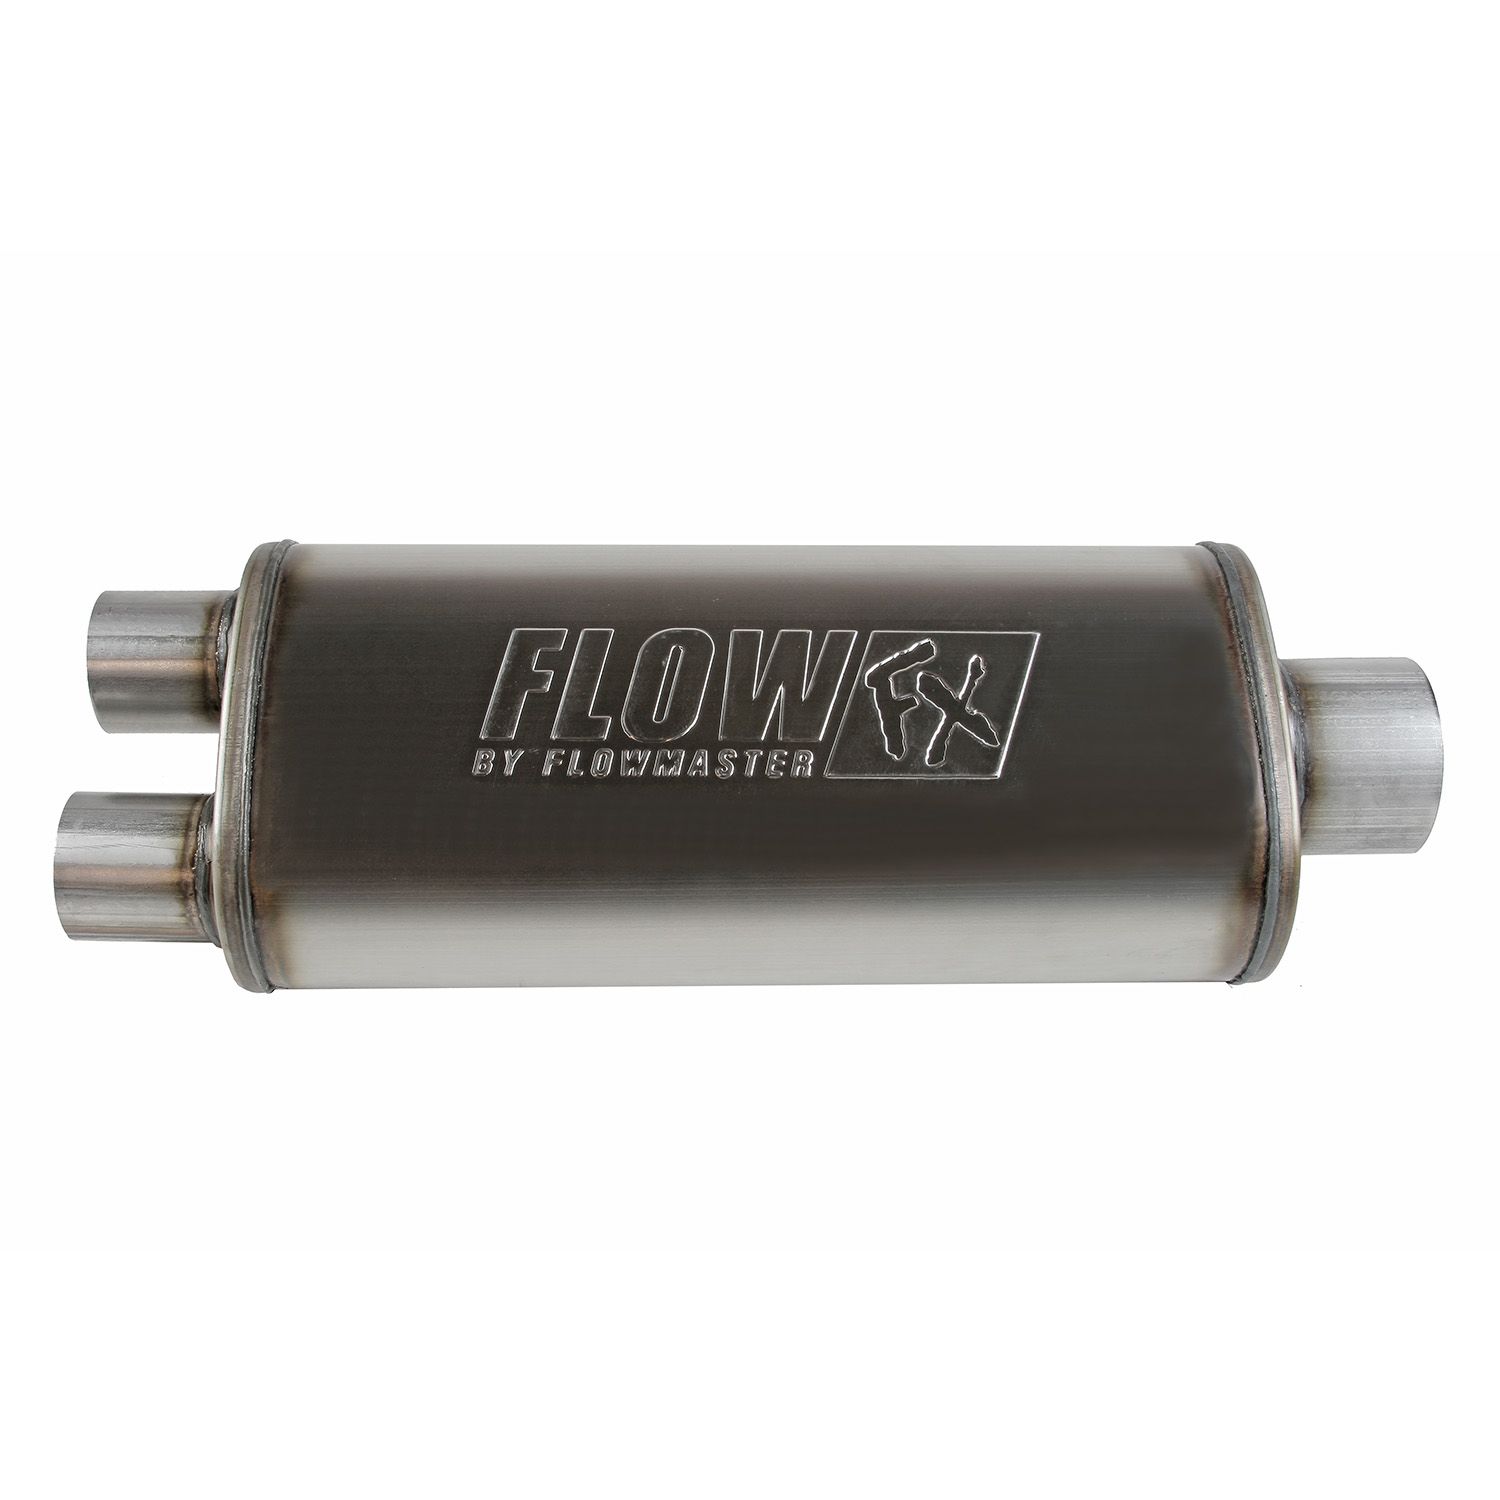 3.50 Center In/2.50 Dual Out - Straight Through Performance - Moderate Sound - Stainless Steel